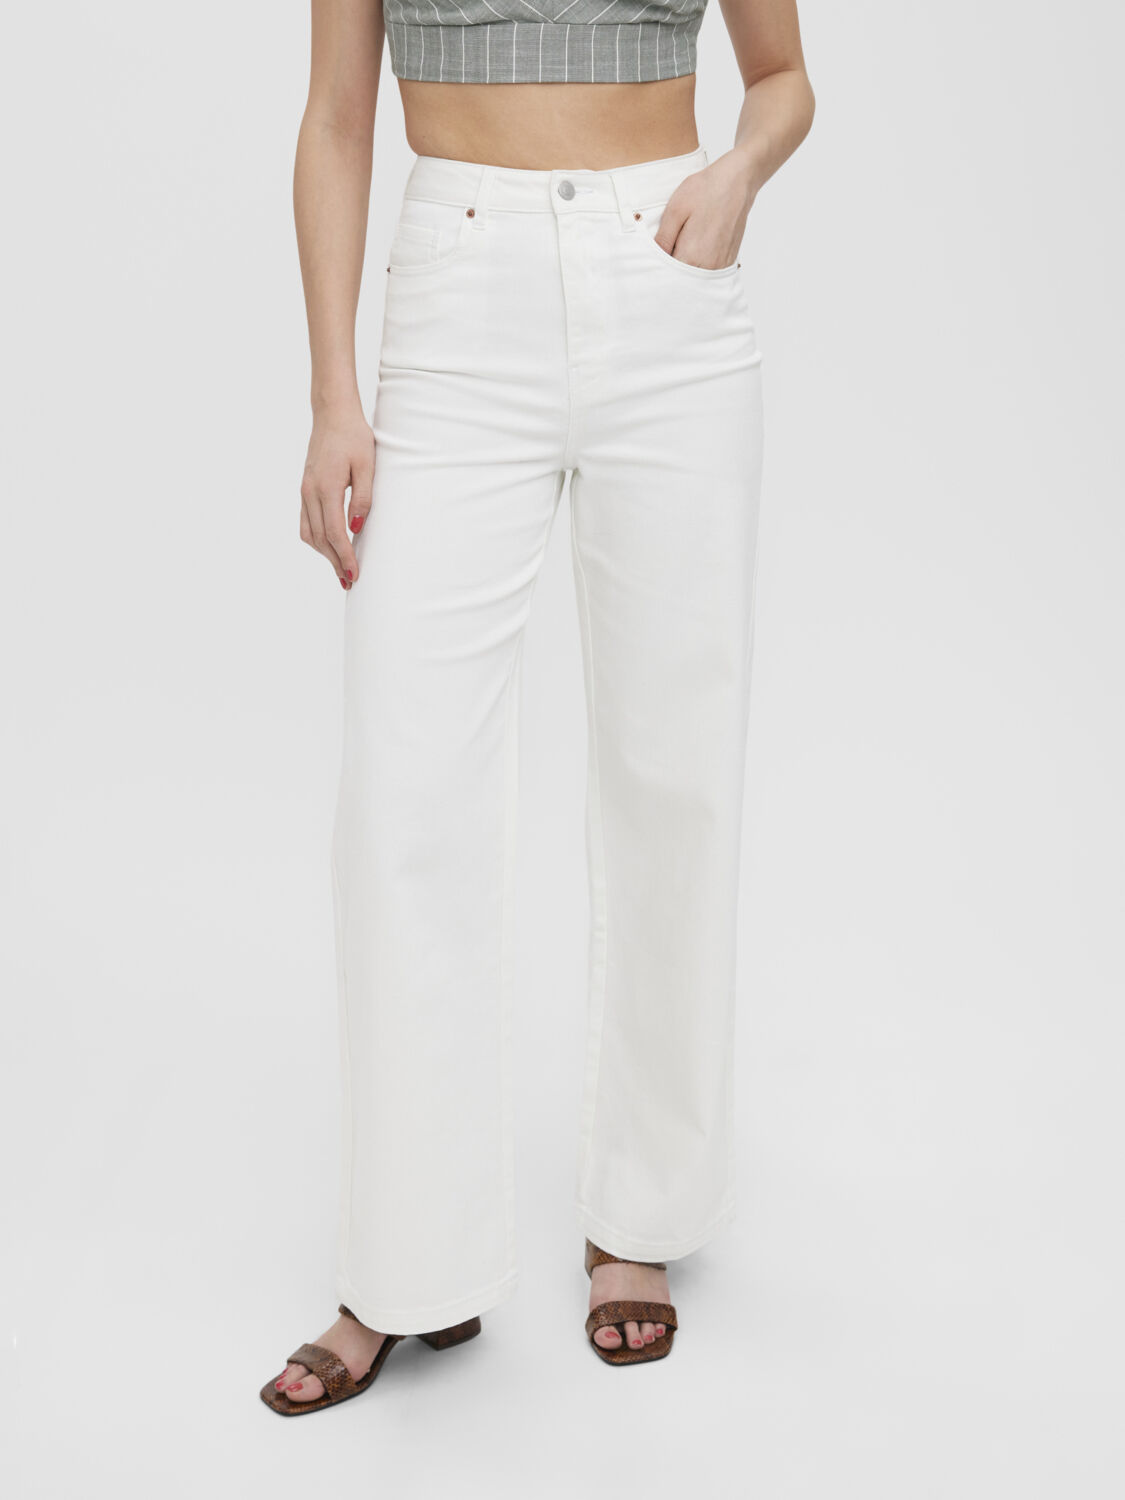 FINAL SALE- Kathy high waist straight fit jeans